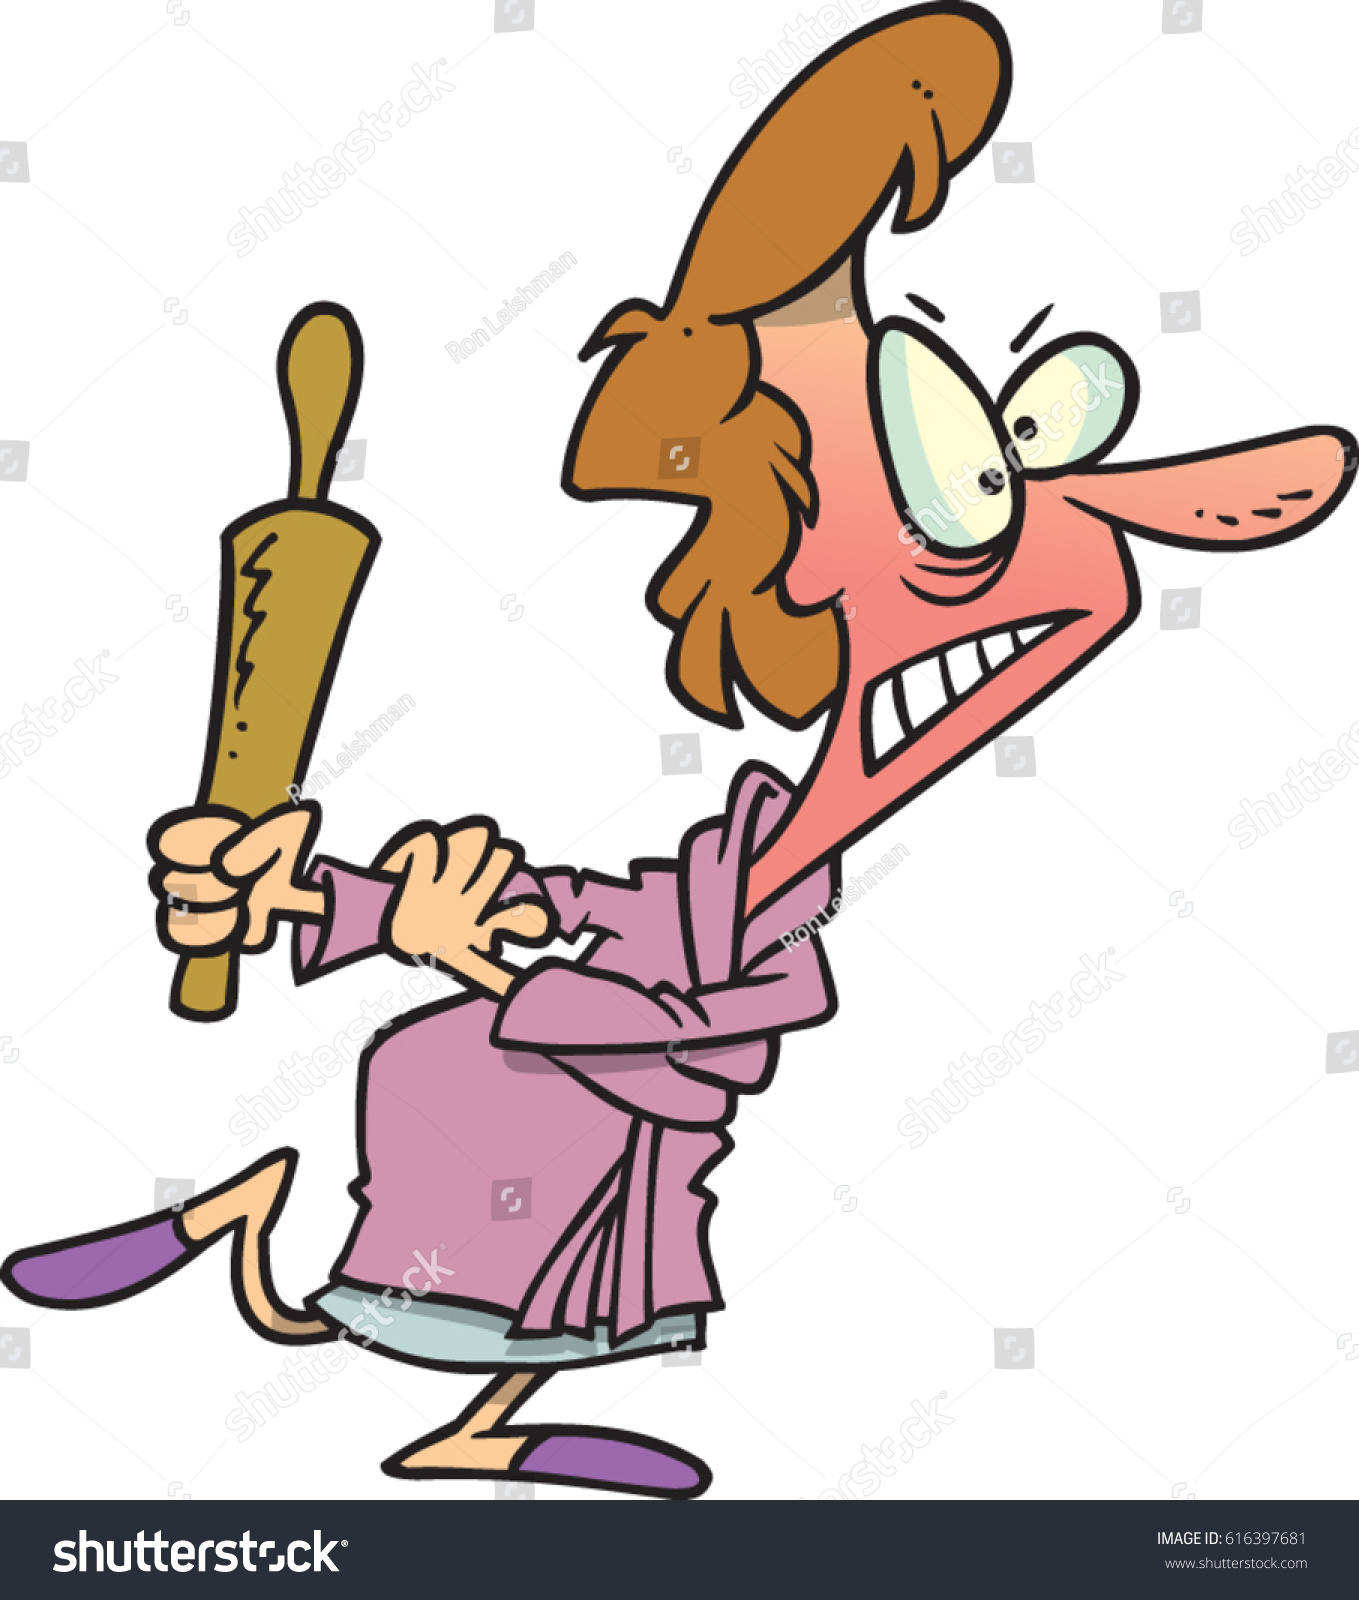 Angry Cartoon Woman Rolling Pin Weapon Stock Vector Royalty Free Shutterstock